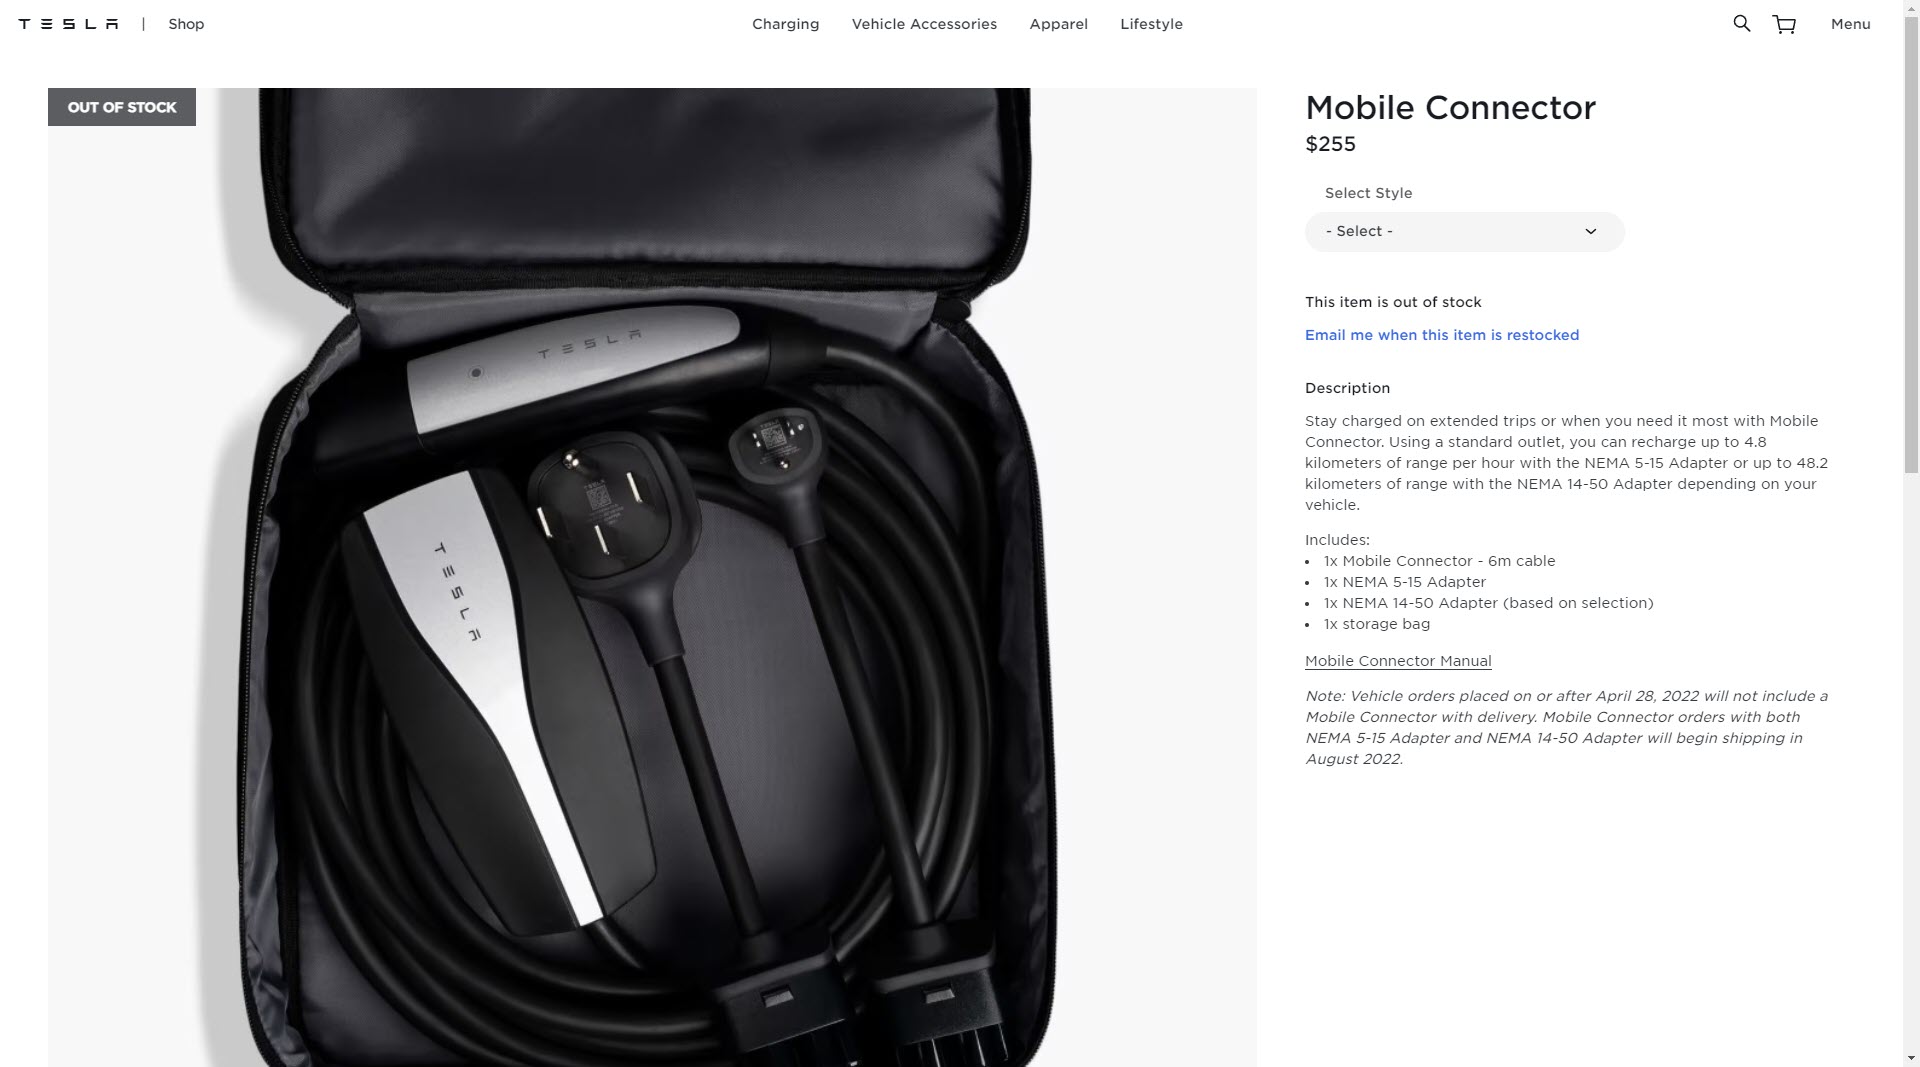 Tesla adds cheaper Mobile Connector with NEMA14-50 adapter and lowers price of Wall Connector